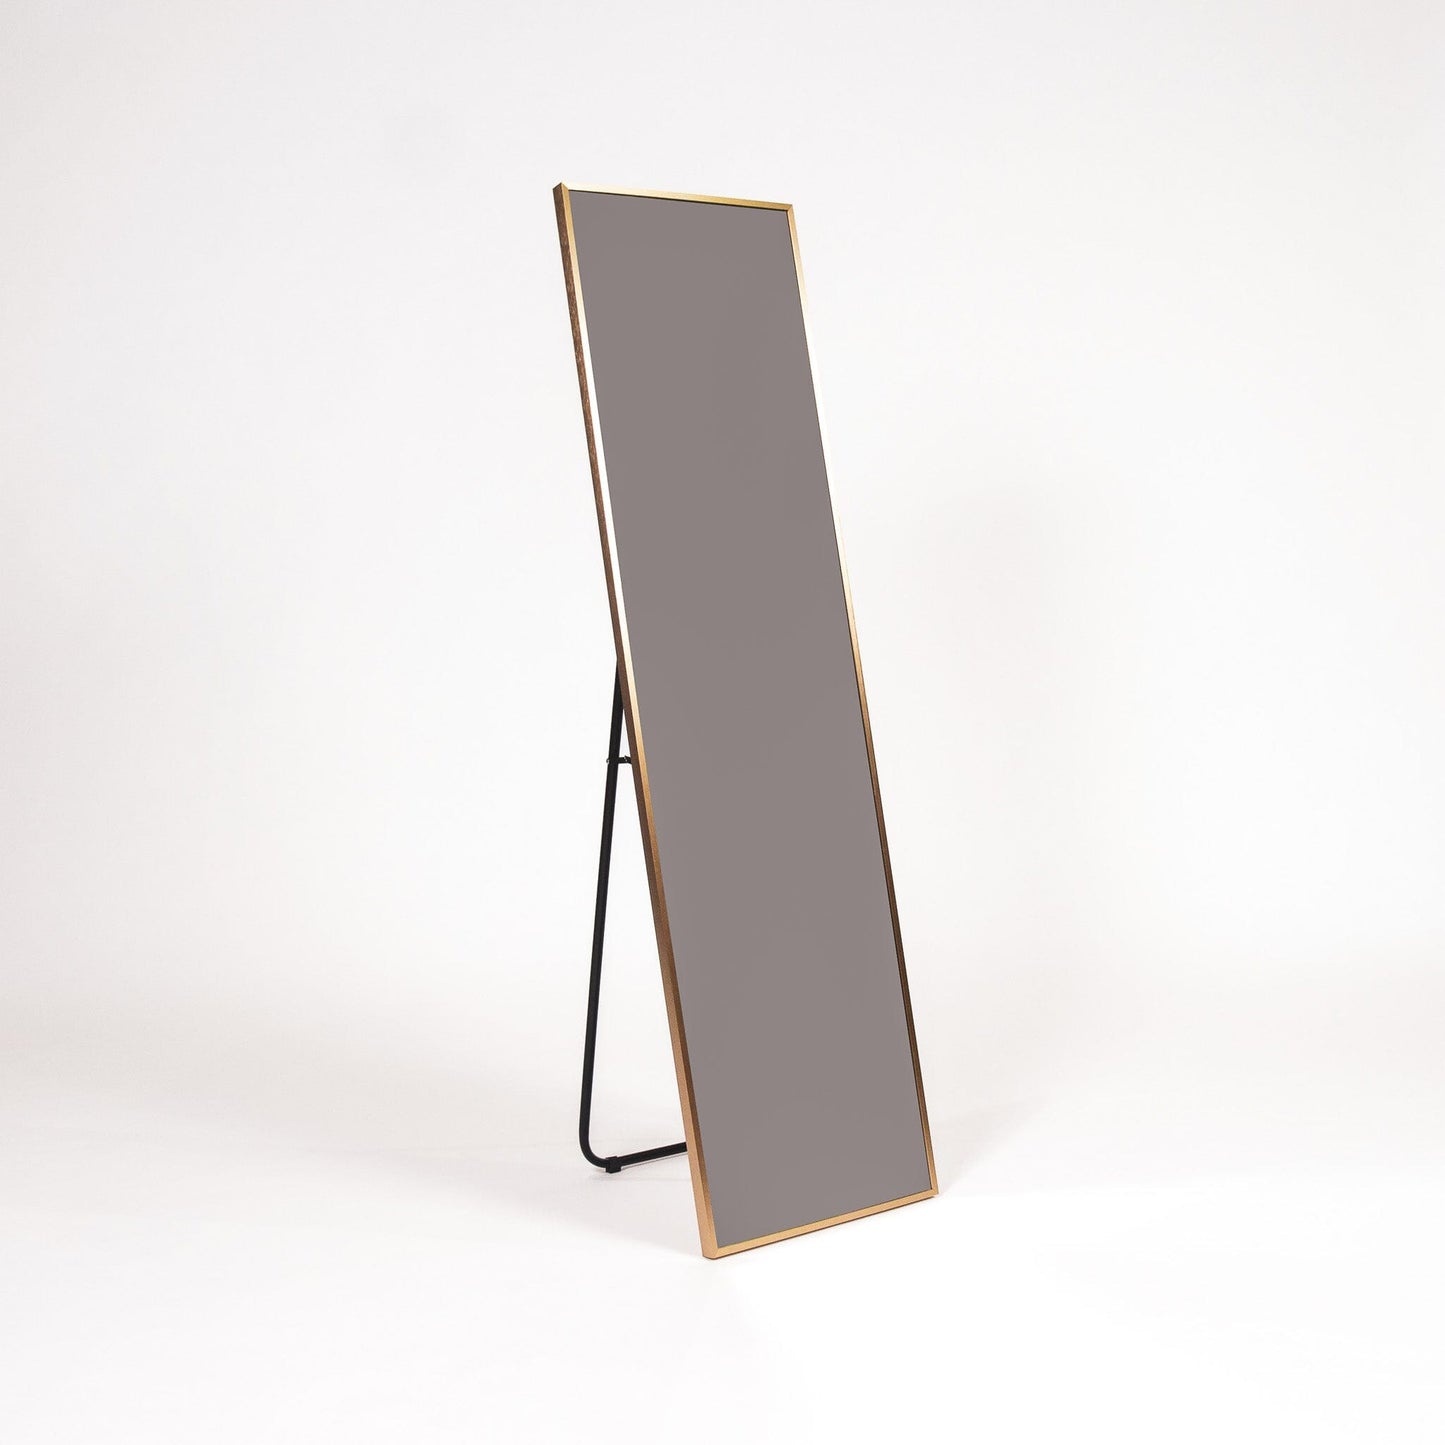 Standing Mirror - large - gold